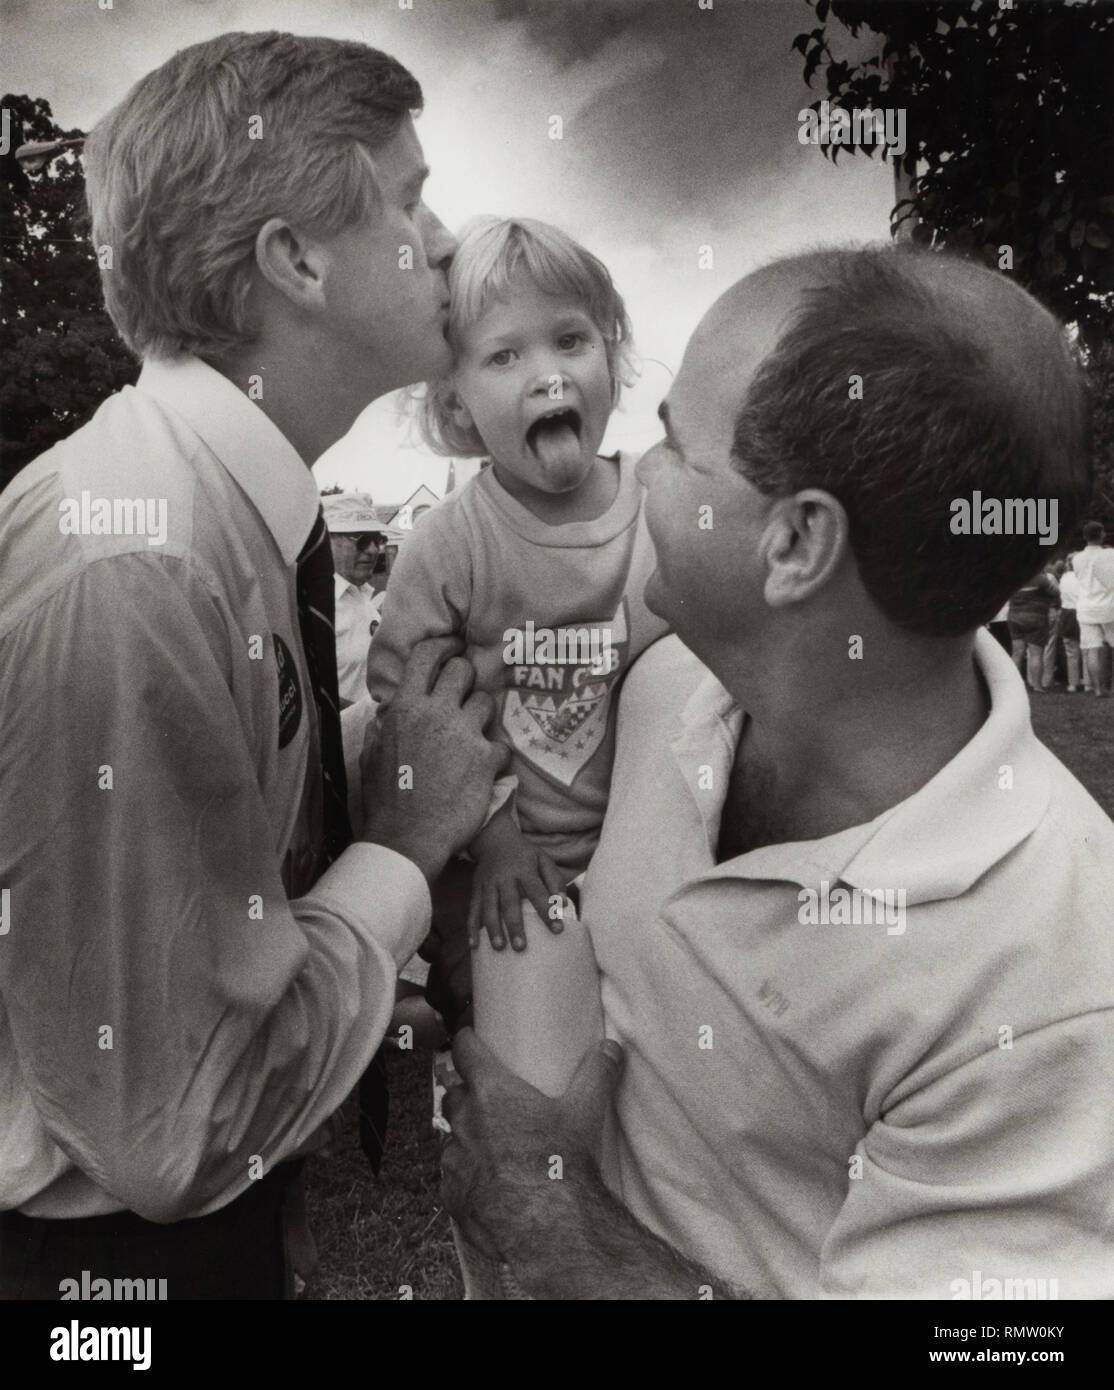 Former Massachusetts Governor Bill Weld announced he will run against President Donald Trump for the Republican Presidential nomination in 2020. in this photo Former Massachusetts Governor William “Bill “ Weld kisses a young girl during a campaign stop in the Boston area , Boston USA photo by bill belknap 1995 Stock Photo